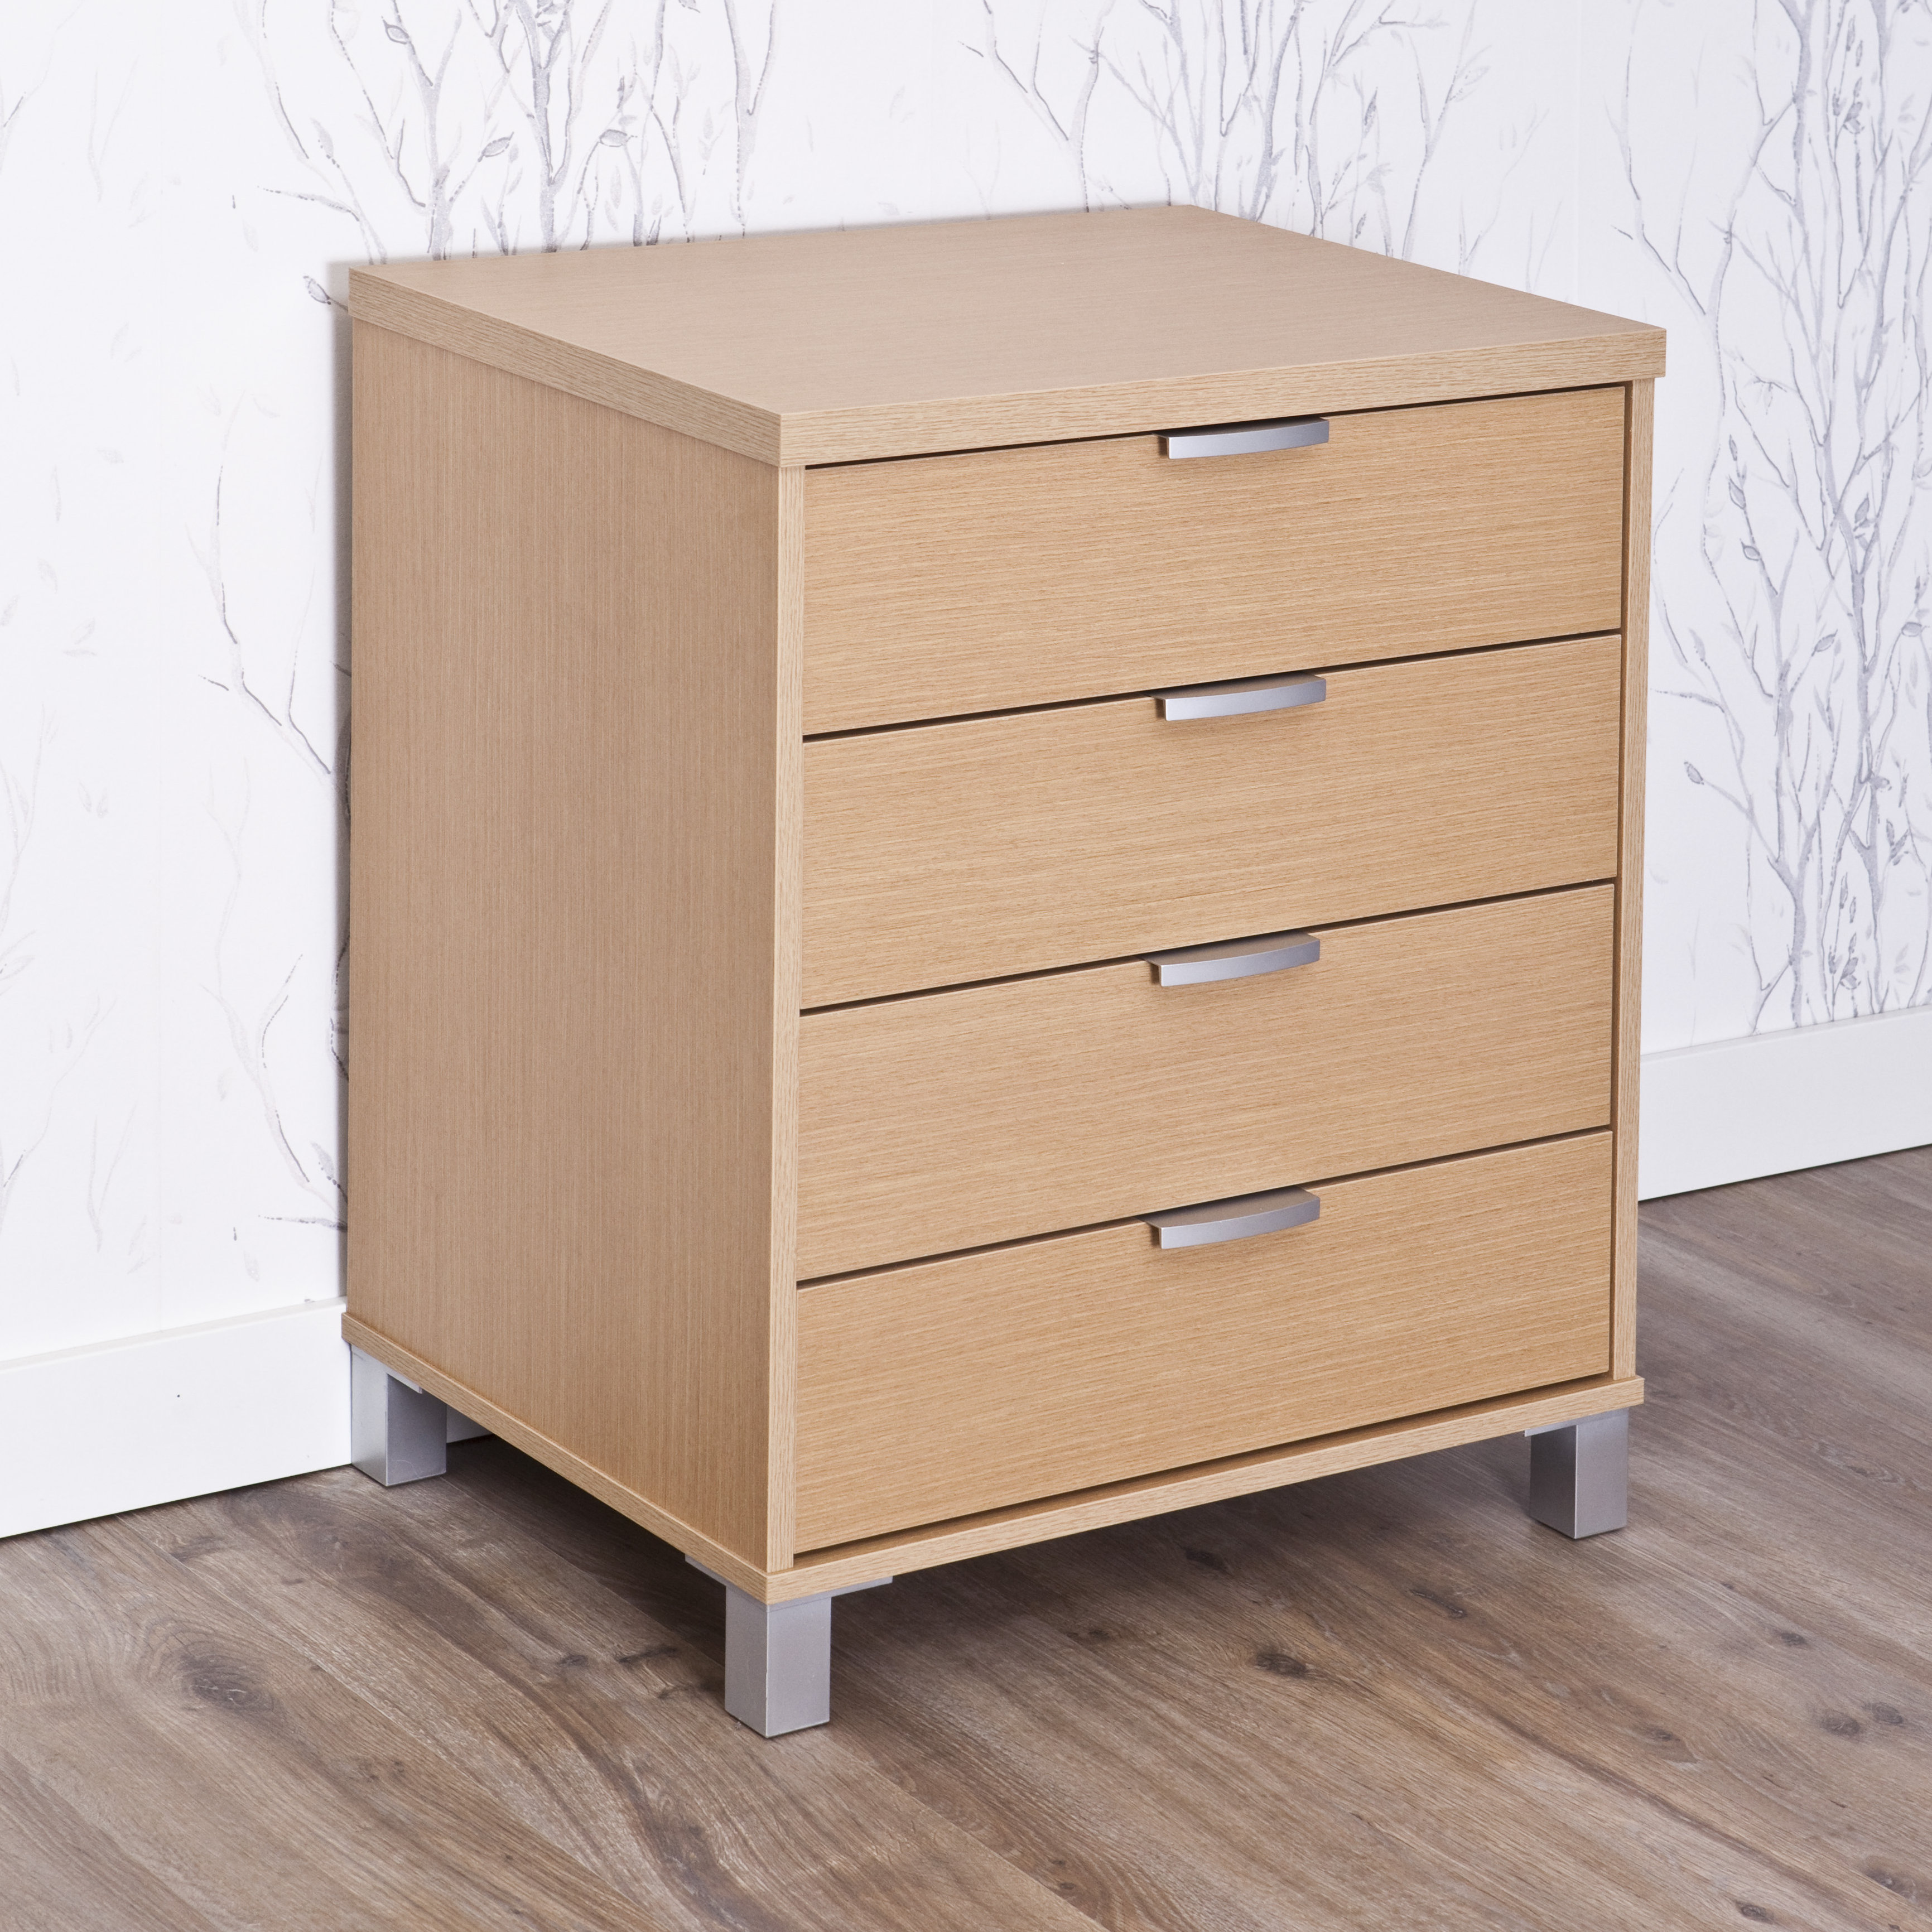 Chest Of Drawers Design Tunkie